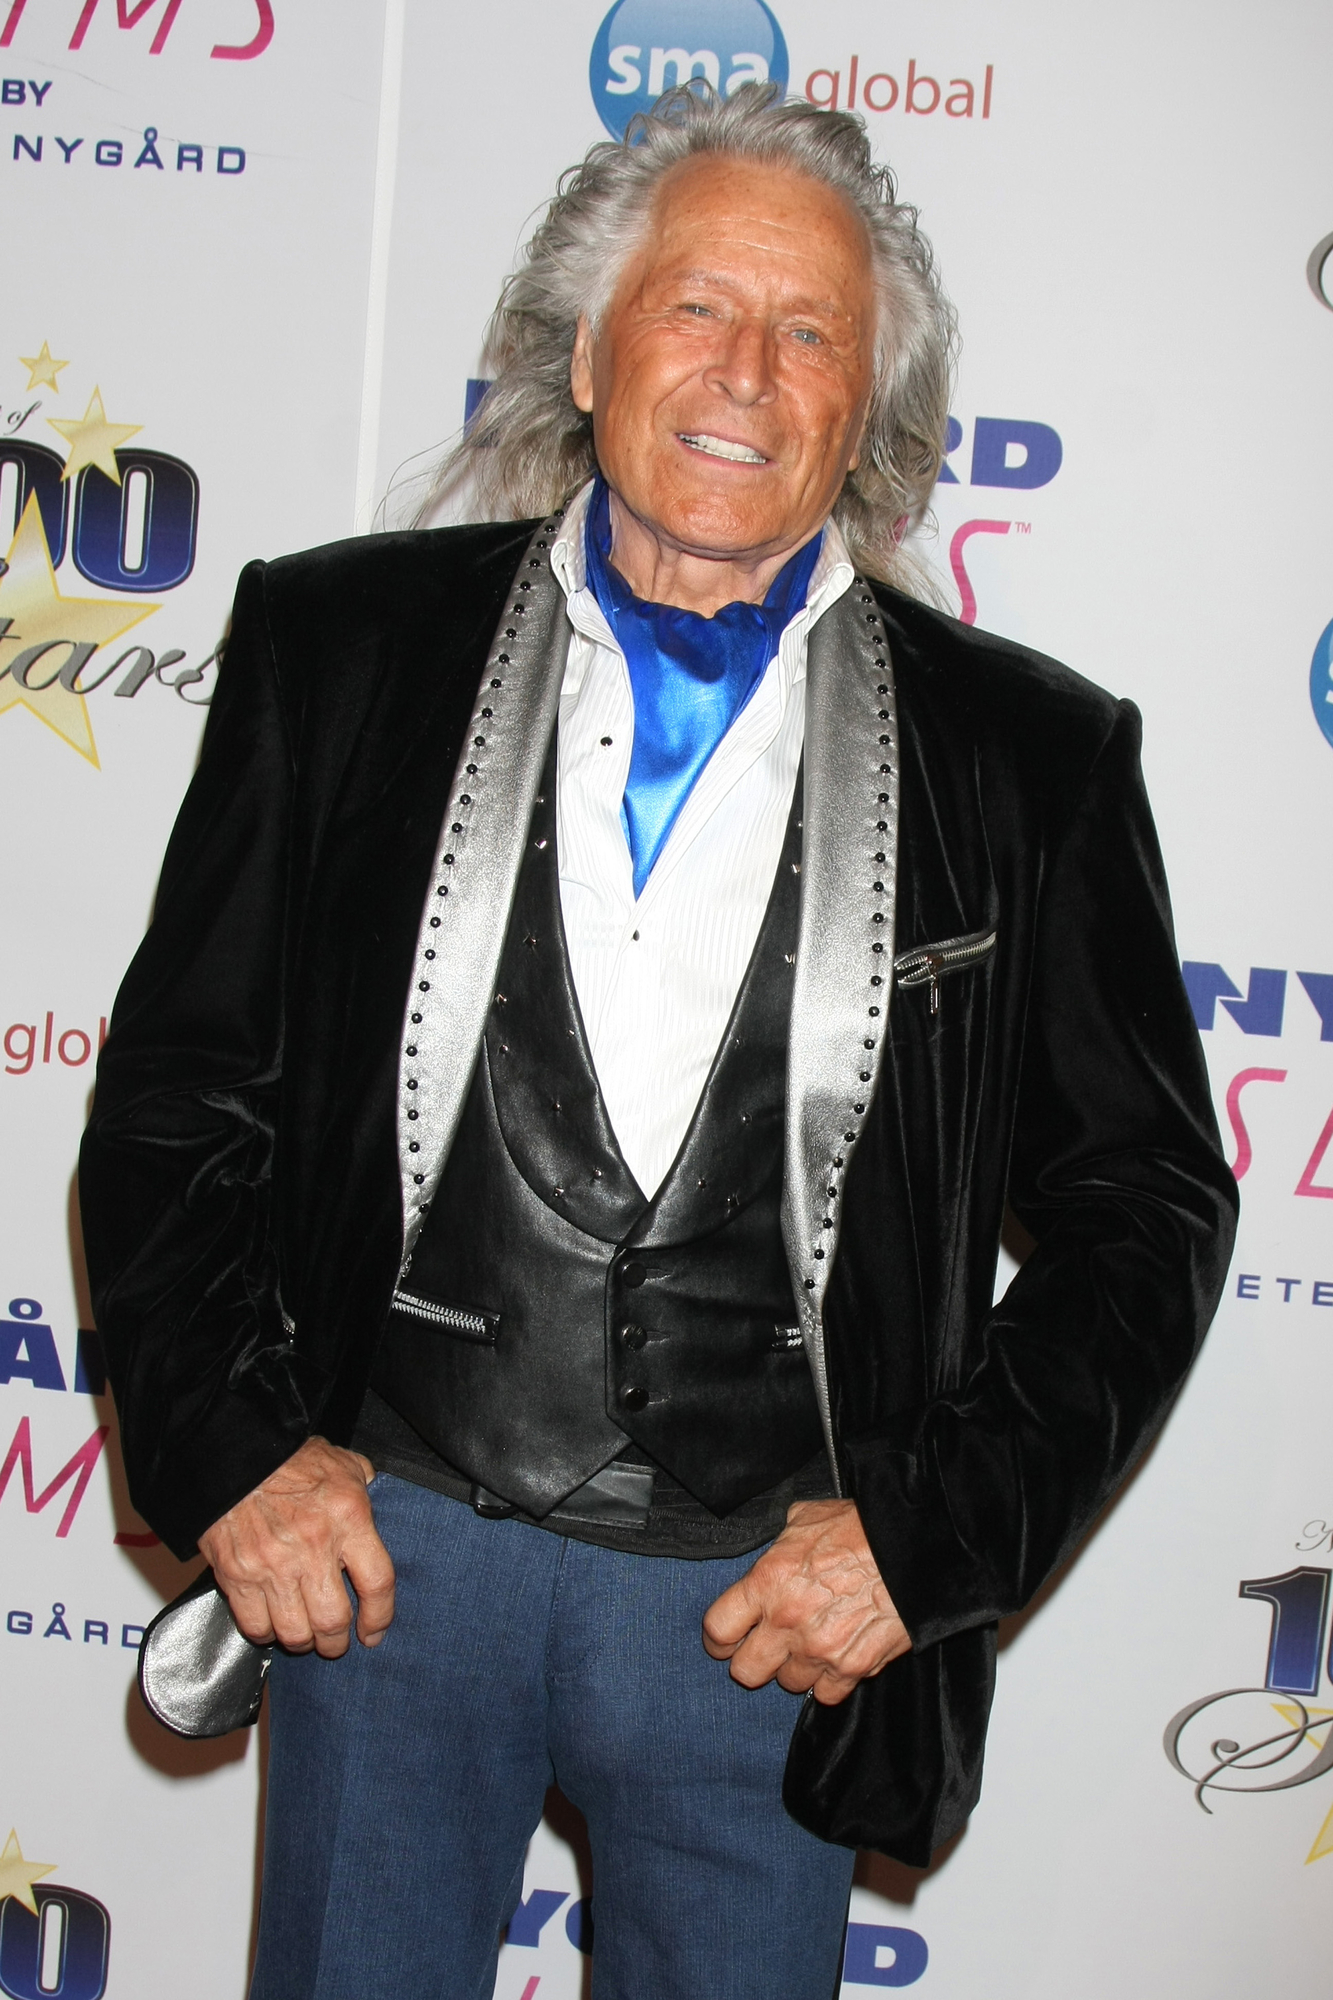 Peter Nygard Faces Sex Trafficking Class Action as More ...